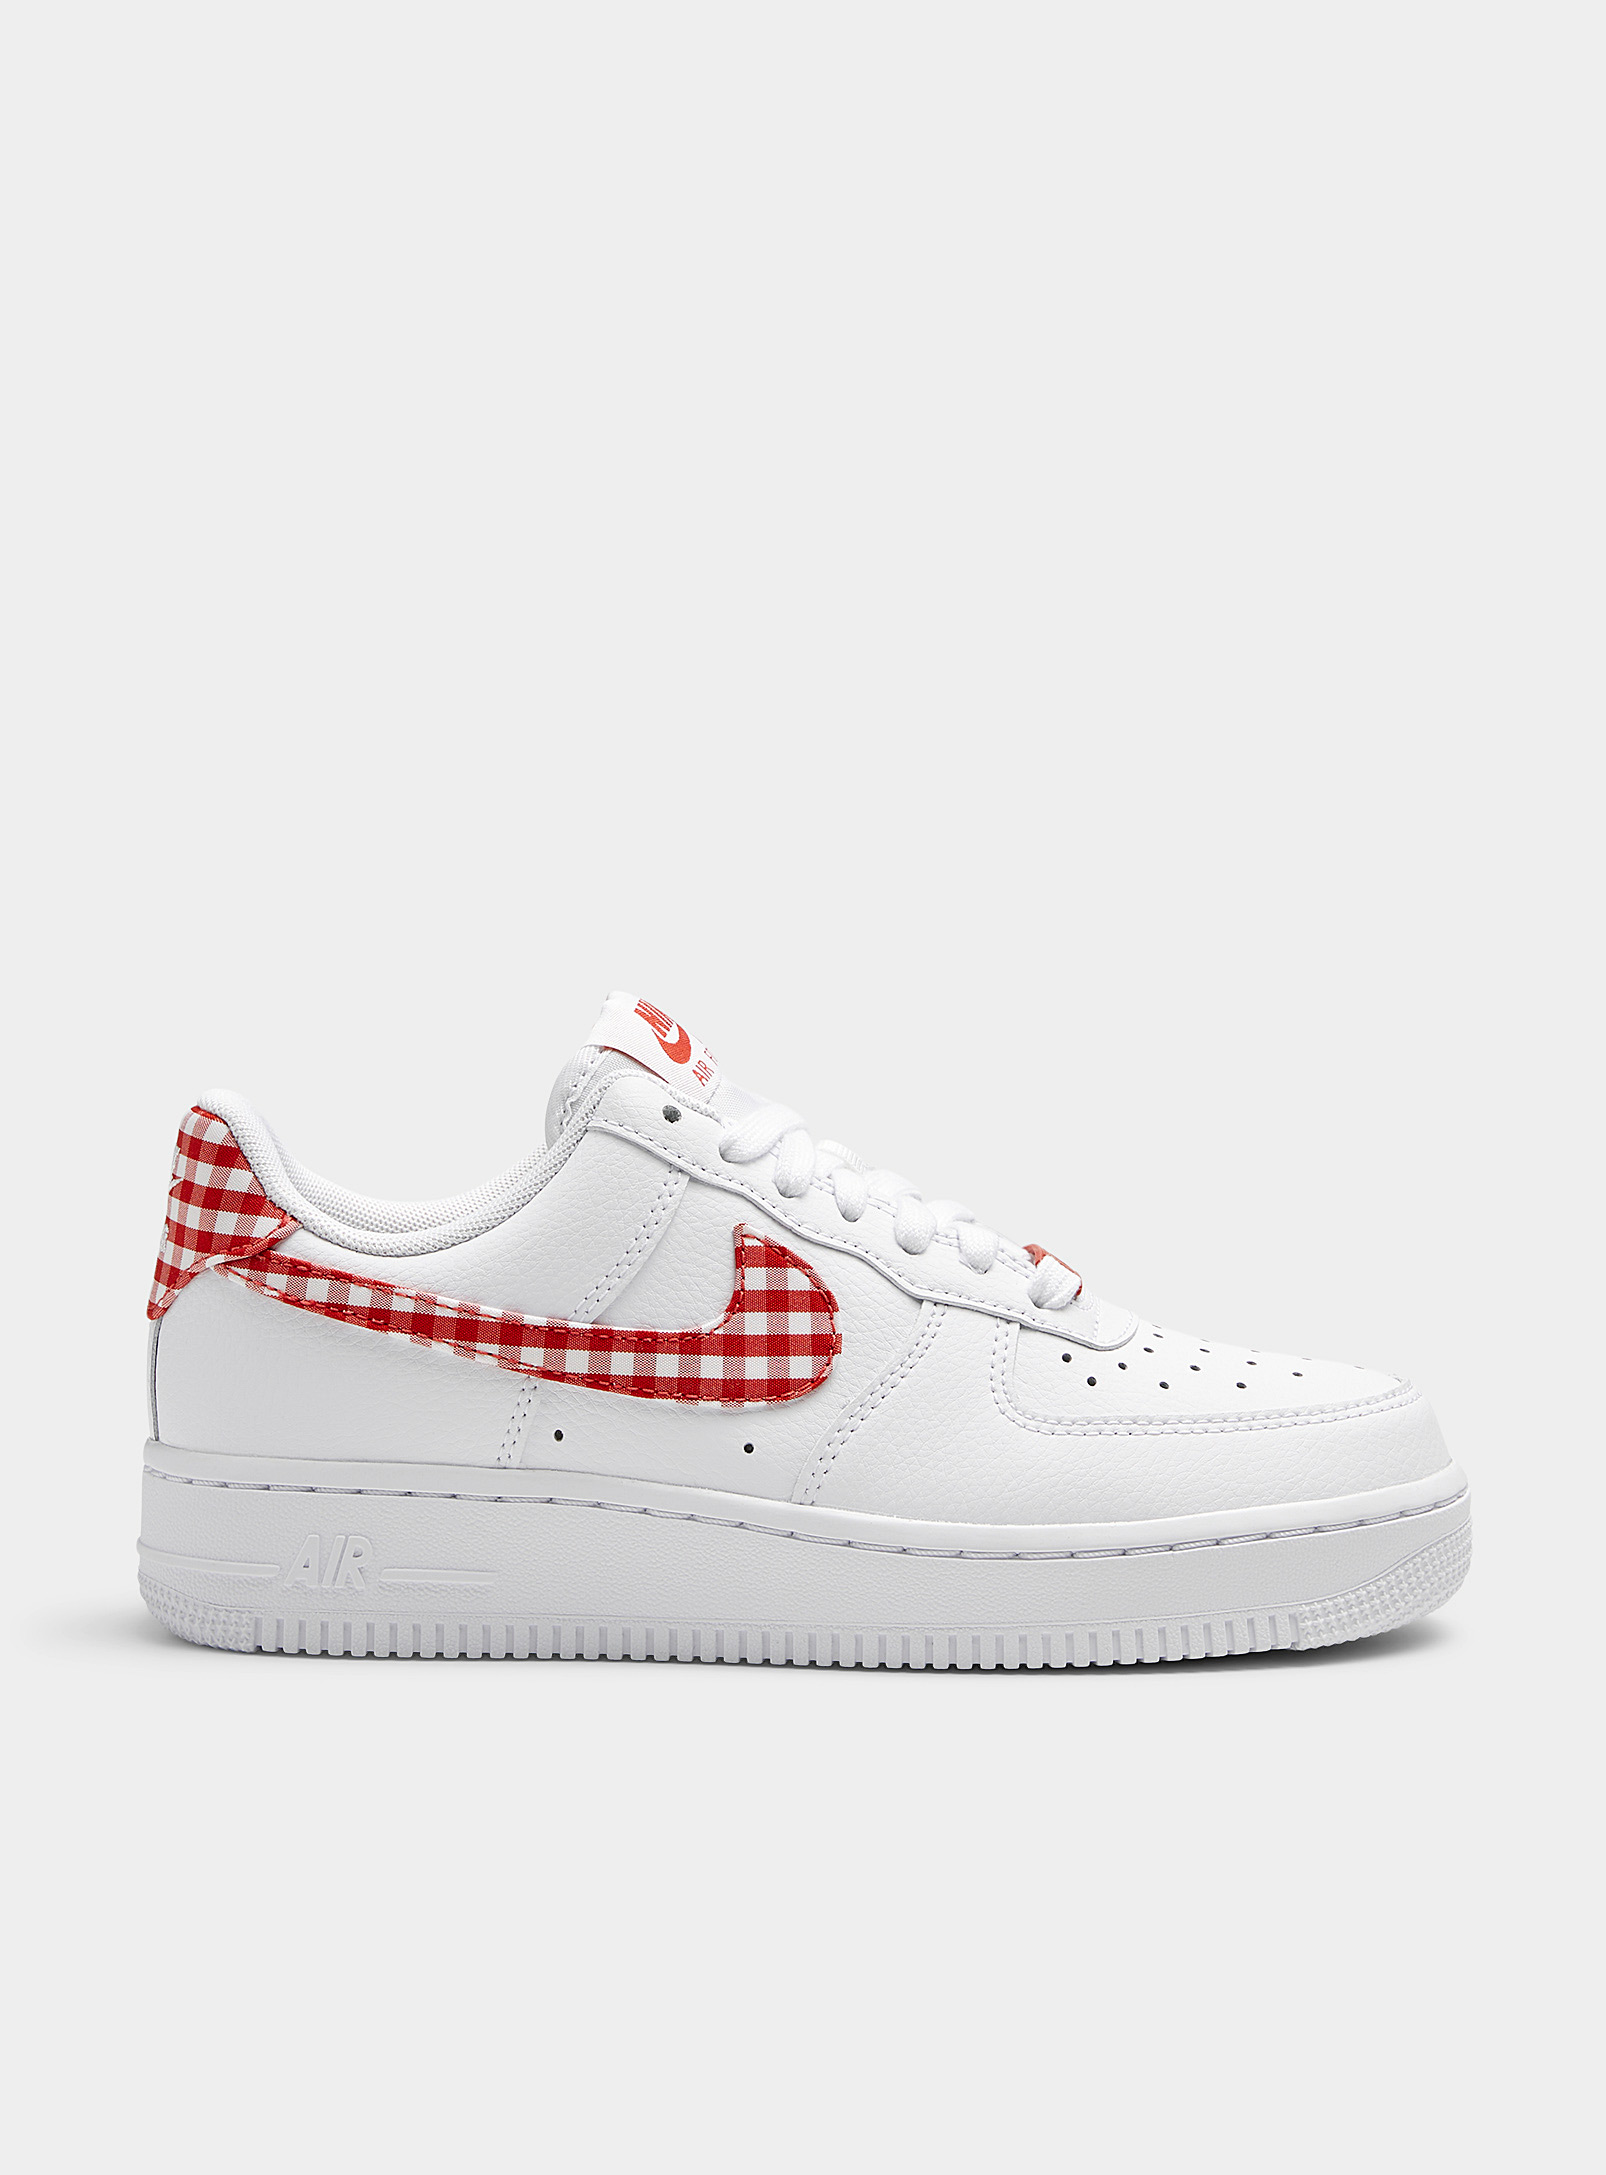 NIKE AIR FORCE 1 '07 GINGHAM ACCENTS SNEAKERS